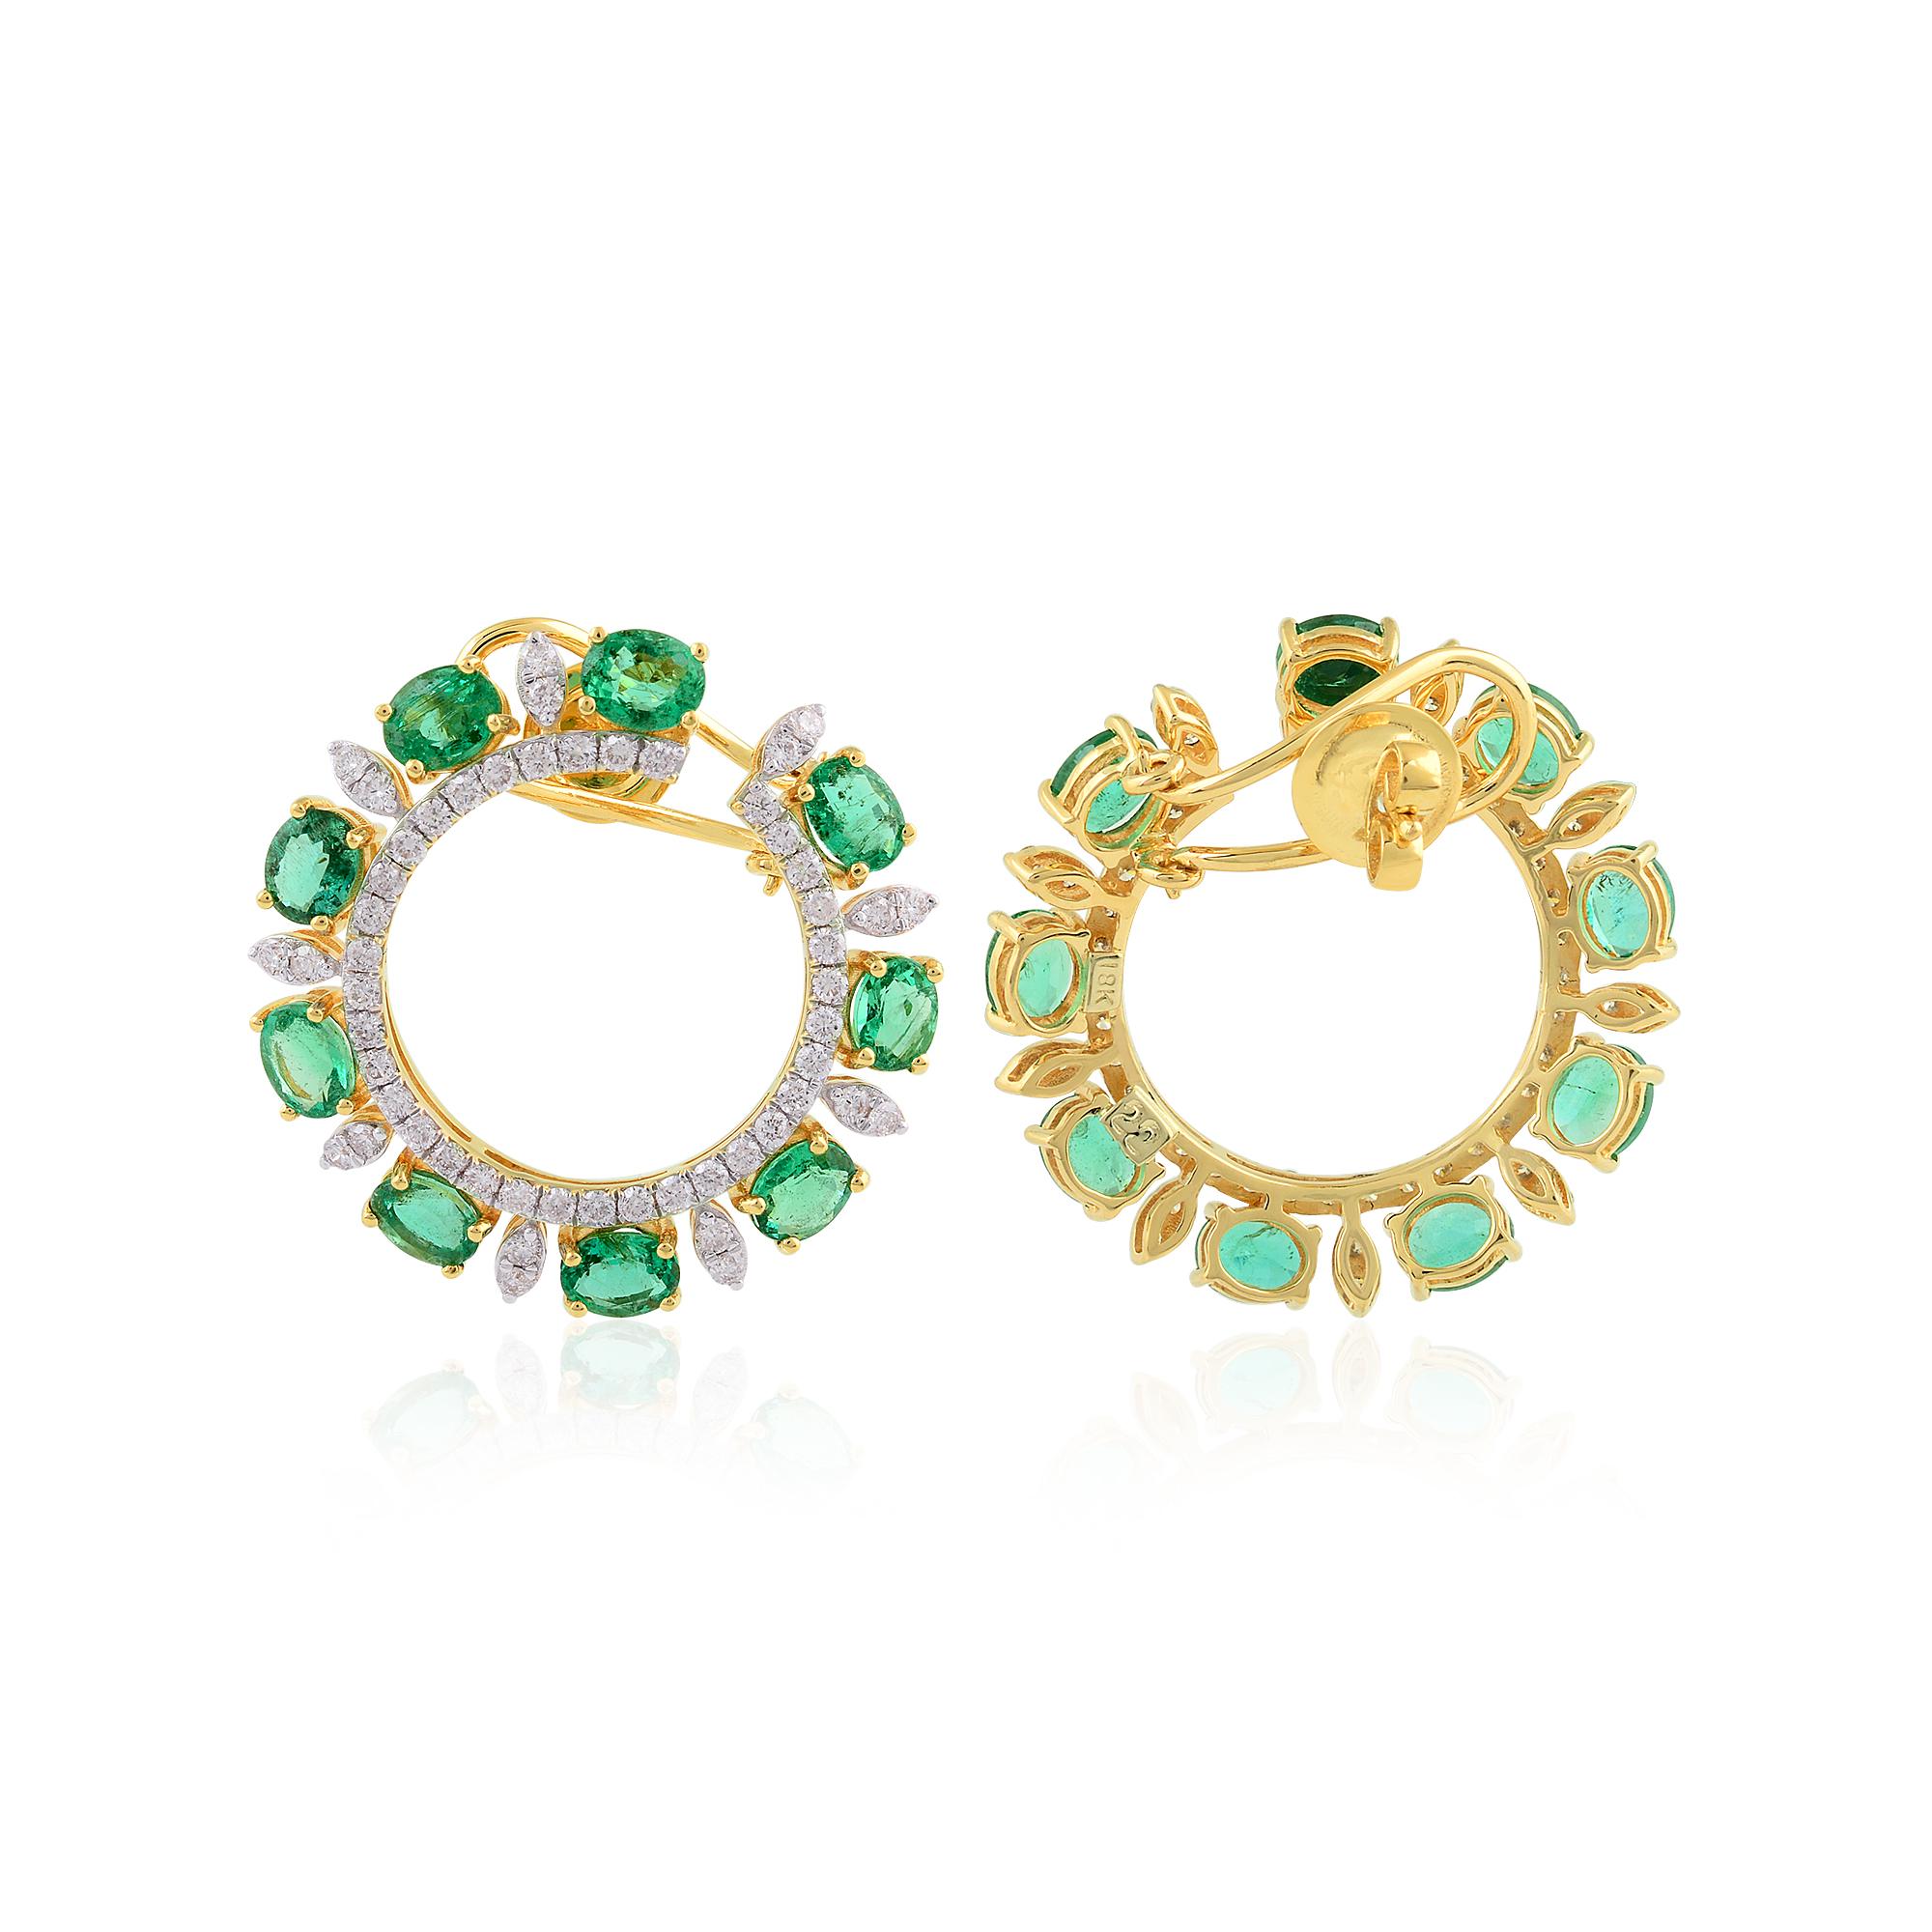 Elevate your elegance with these breathtaking Oval Zambian Emerald Gemstone Lever Back Earrings, adorned with dazzling diamonds and crafted in luxurious 14 Karat Yellow Gold.

Item Code :- SEE-1395C (14k)
Gross Wt. :- 9.85 gm
14k Solid Yellow Gold